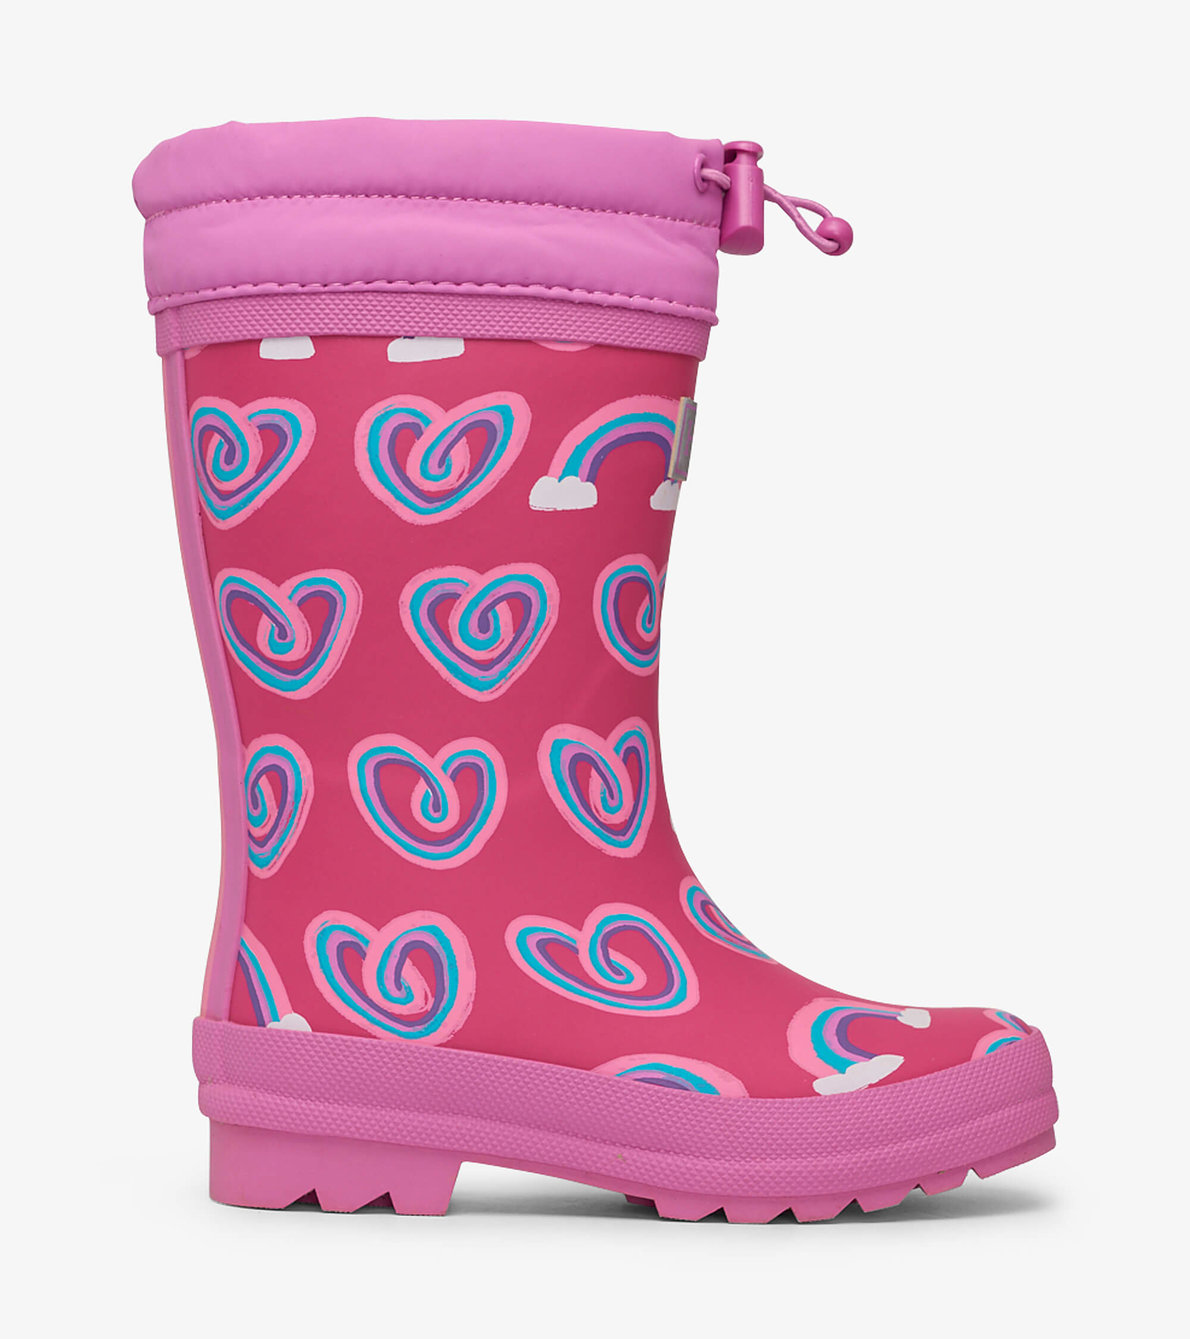 View larger image of Twisty Rainbow Hearts Sherpa Lined Rain Boots